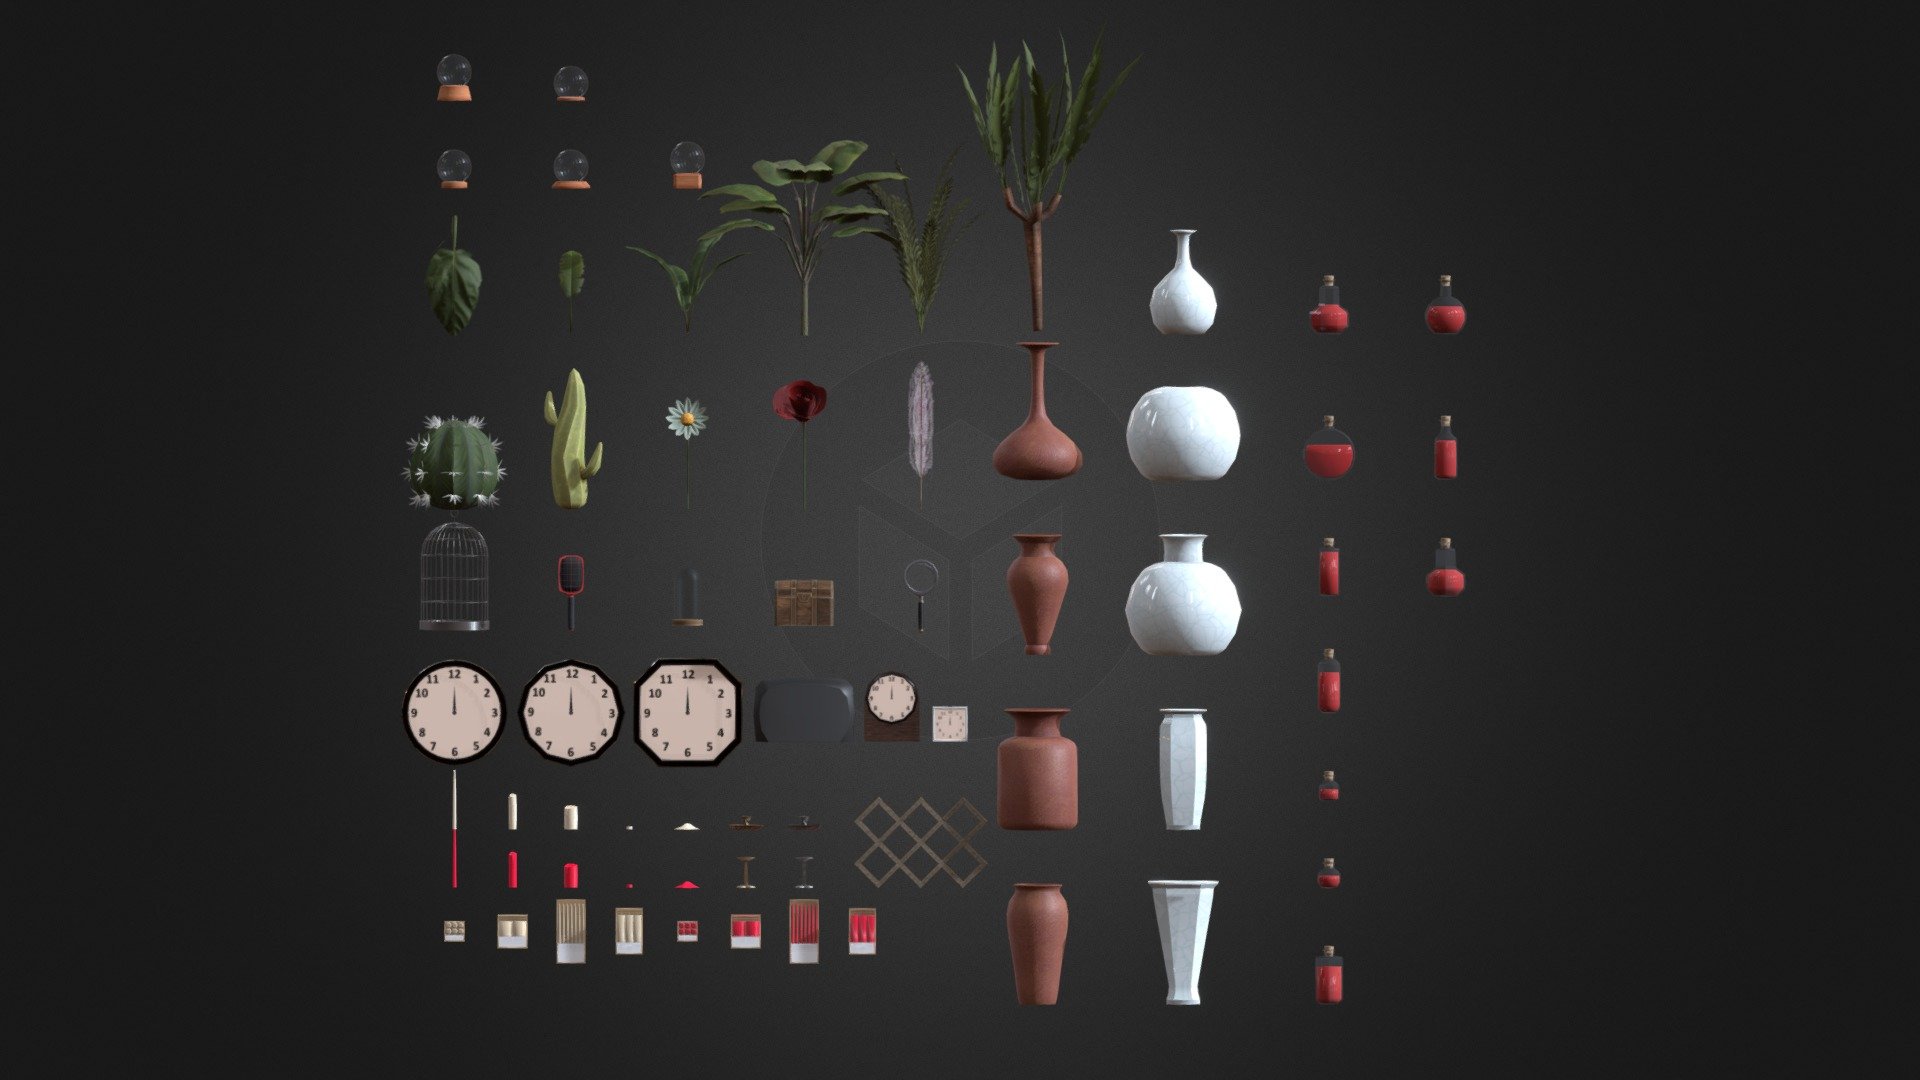 Decoration asset set containing various objects that can be used to fill the background. Game ready mid to low poly assets with various texture sizes aimed at 10.24 PX/CM texel density.

Addition file includes 2 LODs for each object and some color variations on select items.

By Studio Semitorus 3d model